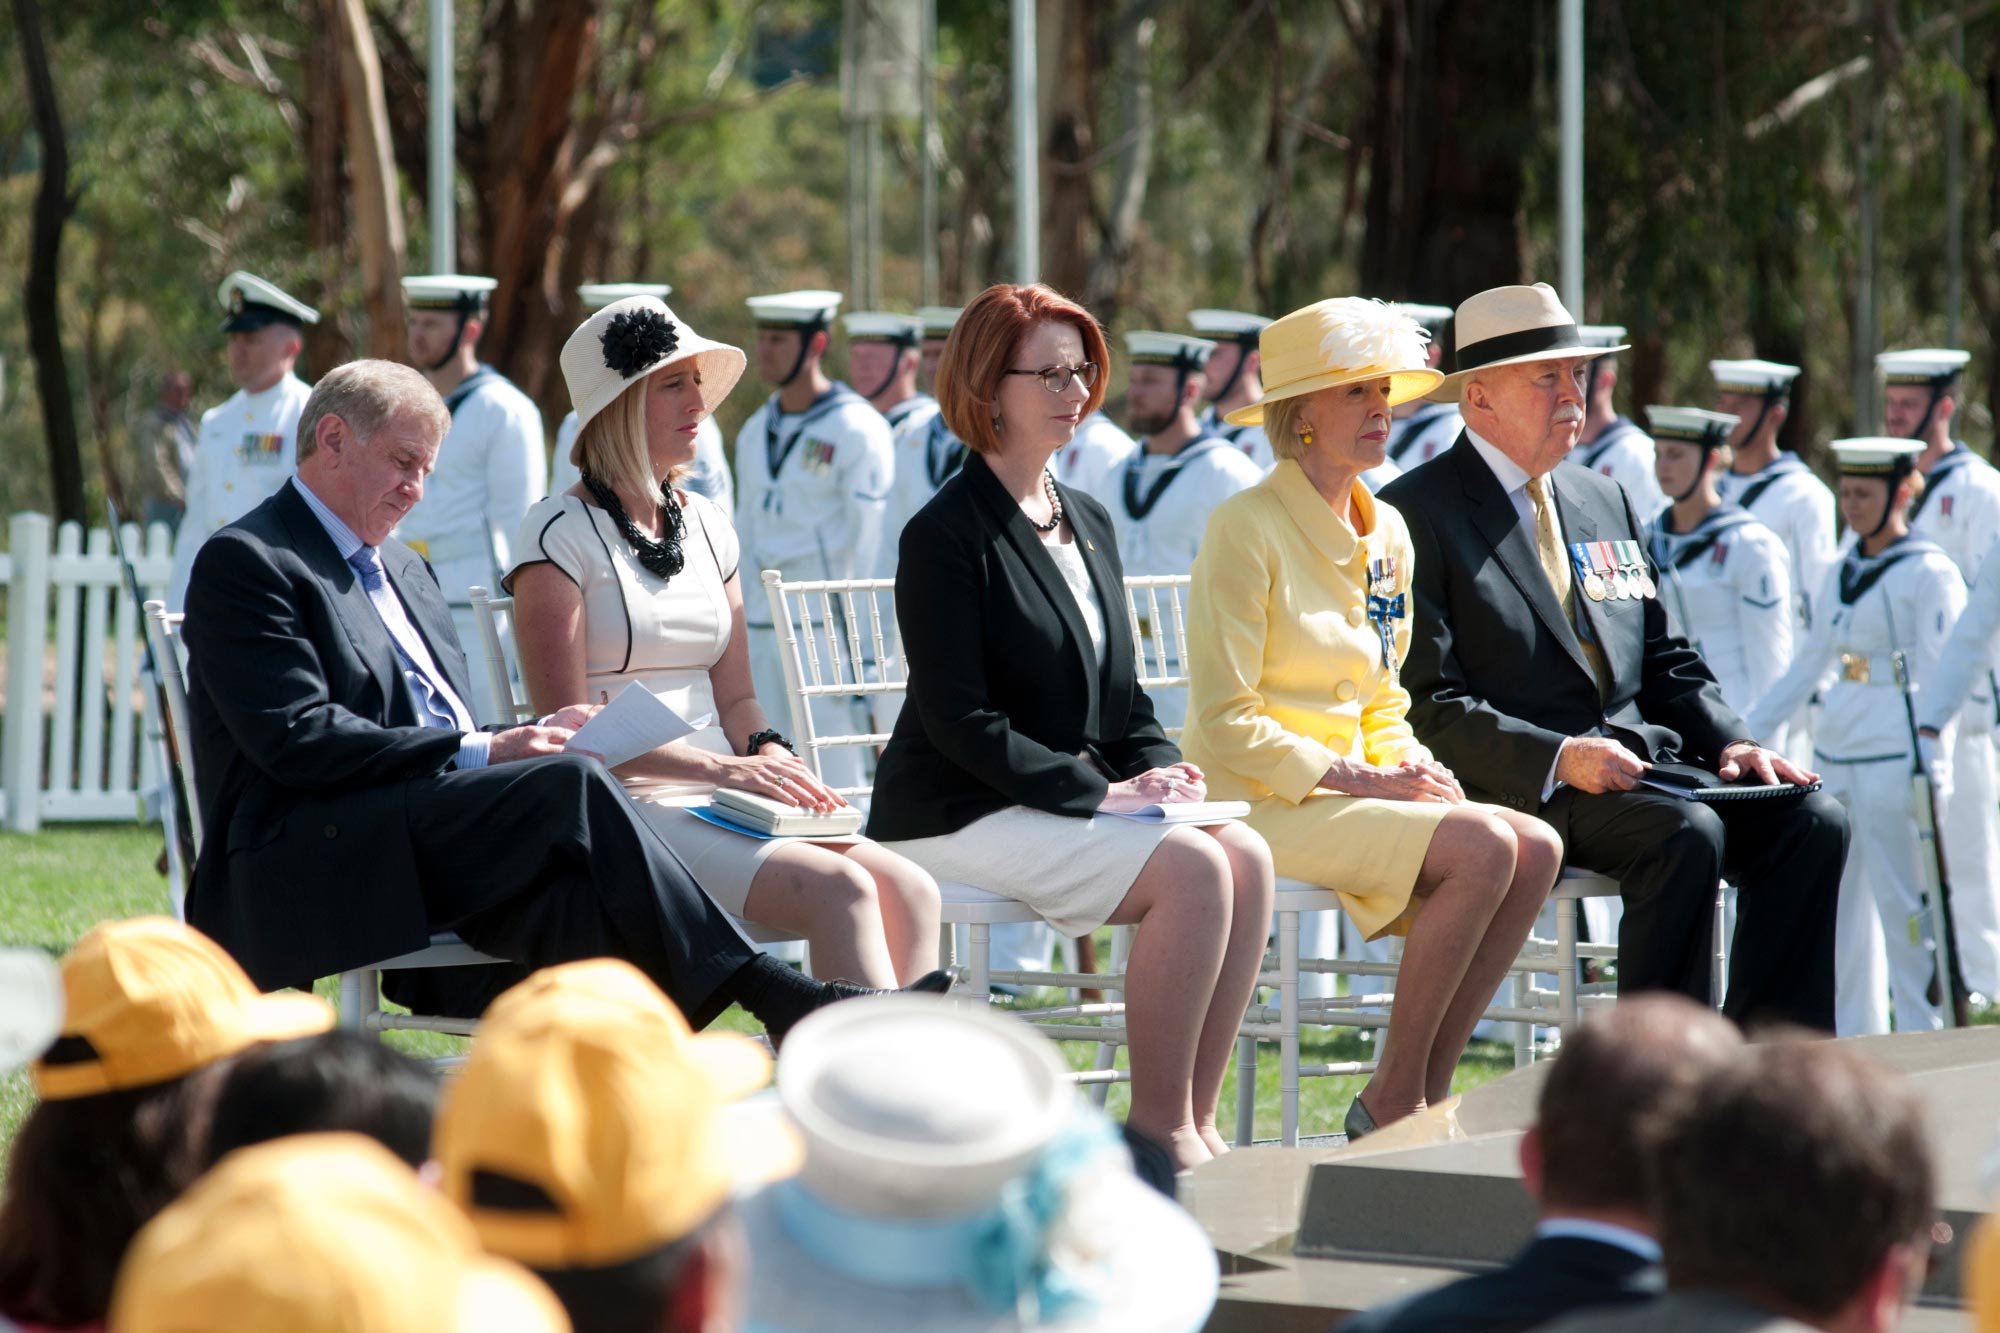 <p>Prime Minister Julia Gillard and Governor-General Ms Quentin Bryce attend centenary of Canberra celebrations, 2013</p>
